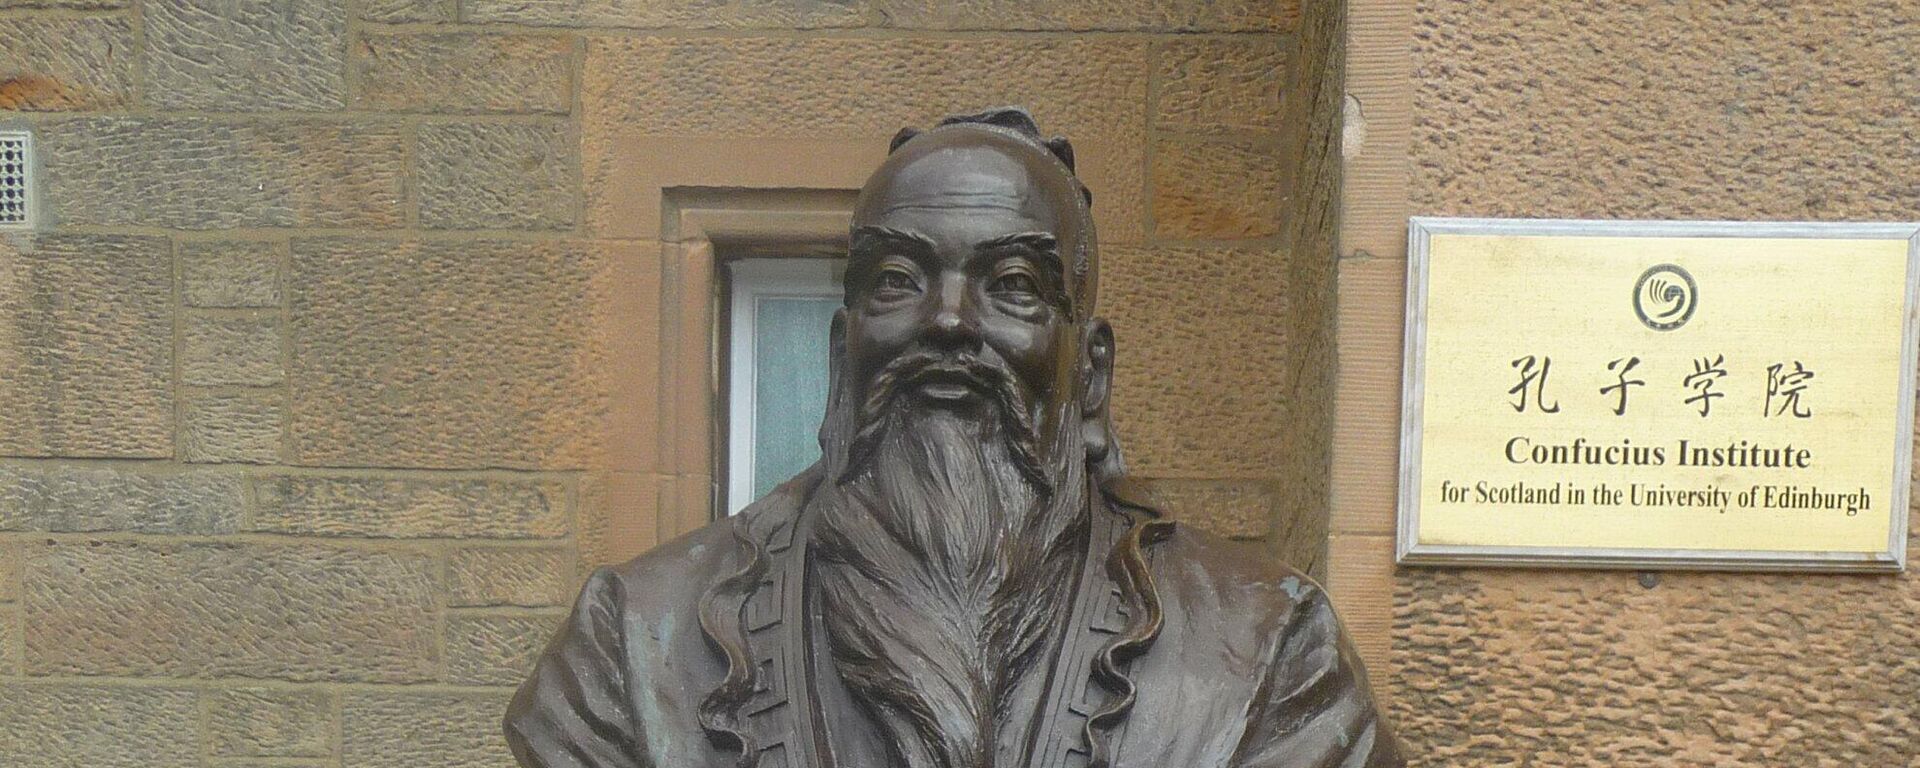 This bust of Confucius, donated by Hanban in September 2007, is situated at the entrance to the Confucius Institute for Scotland in the University of Edinburgh - Sputnik International, 1920, 11.10.2022